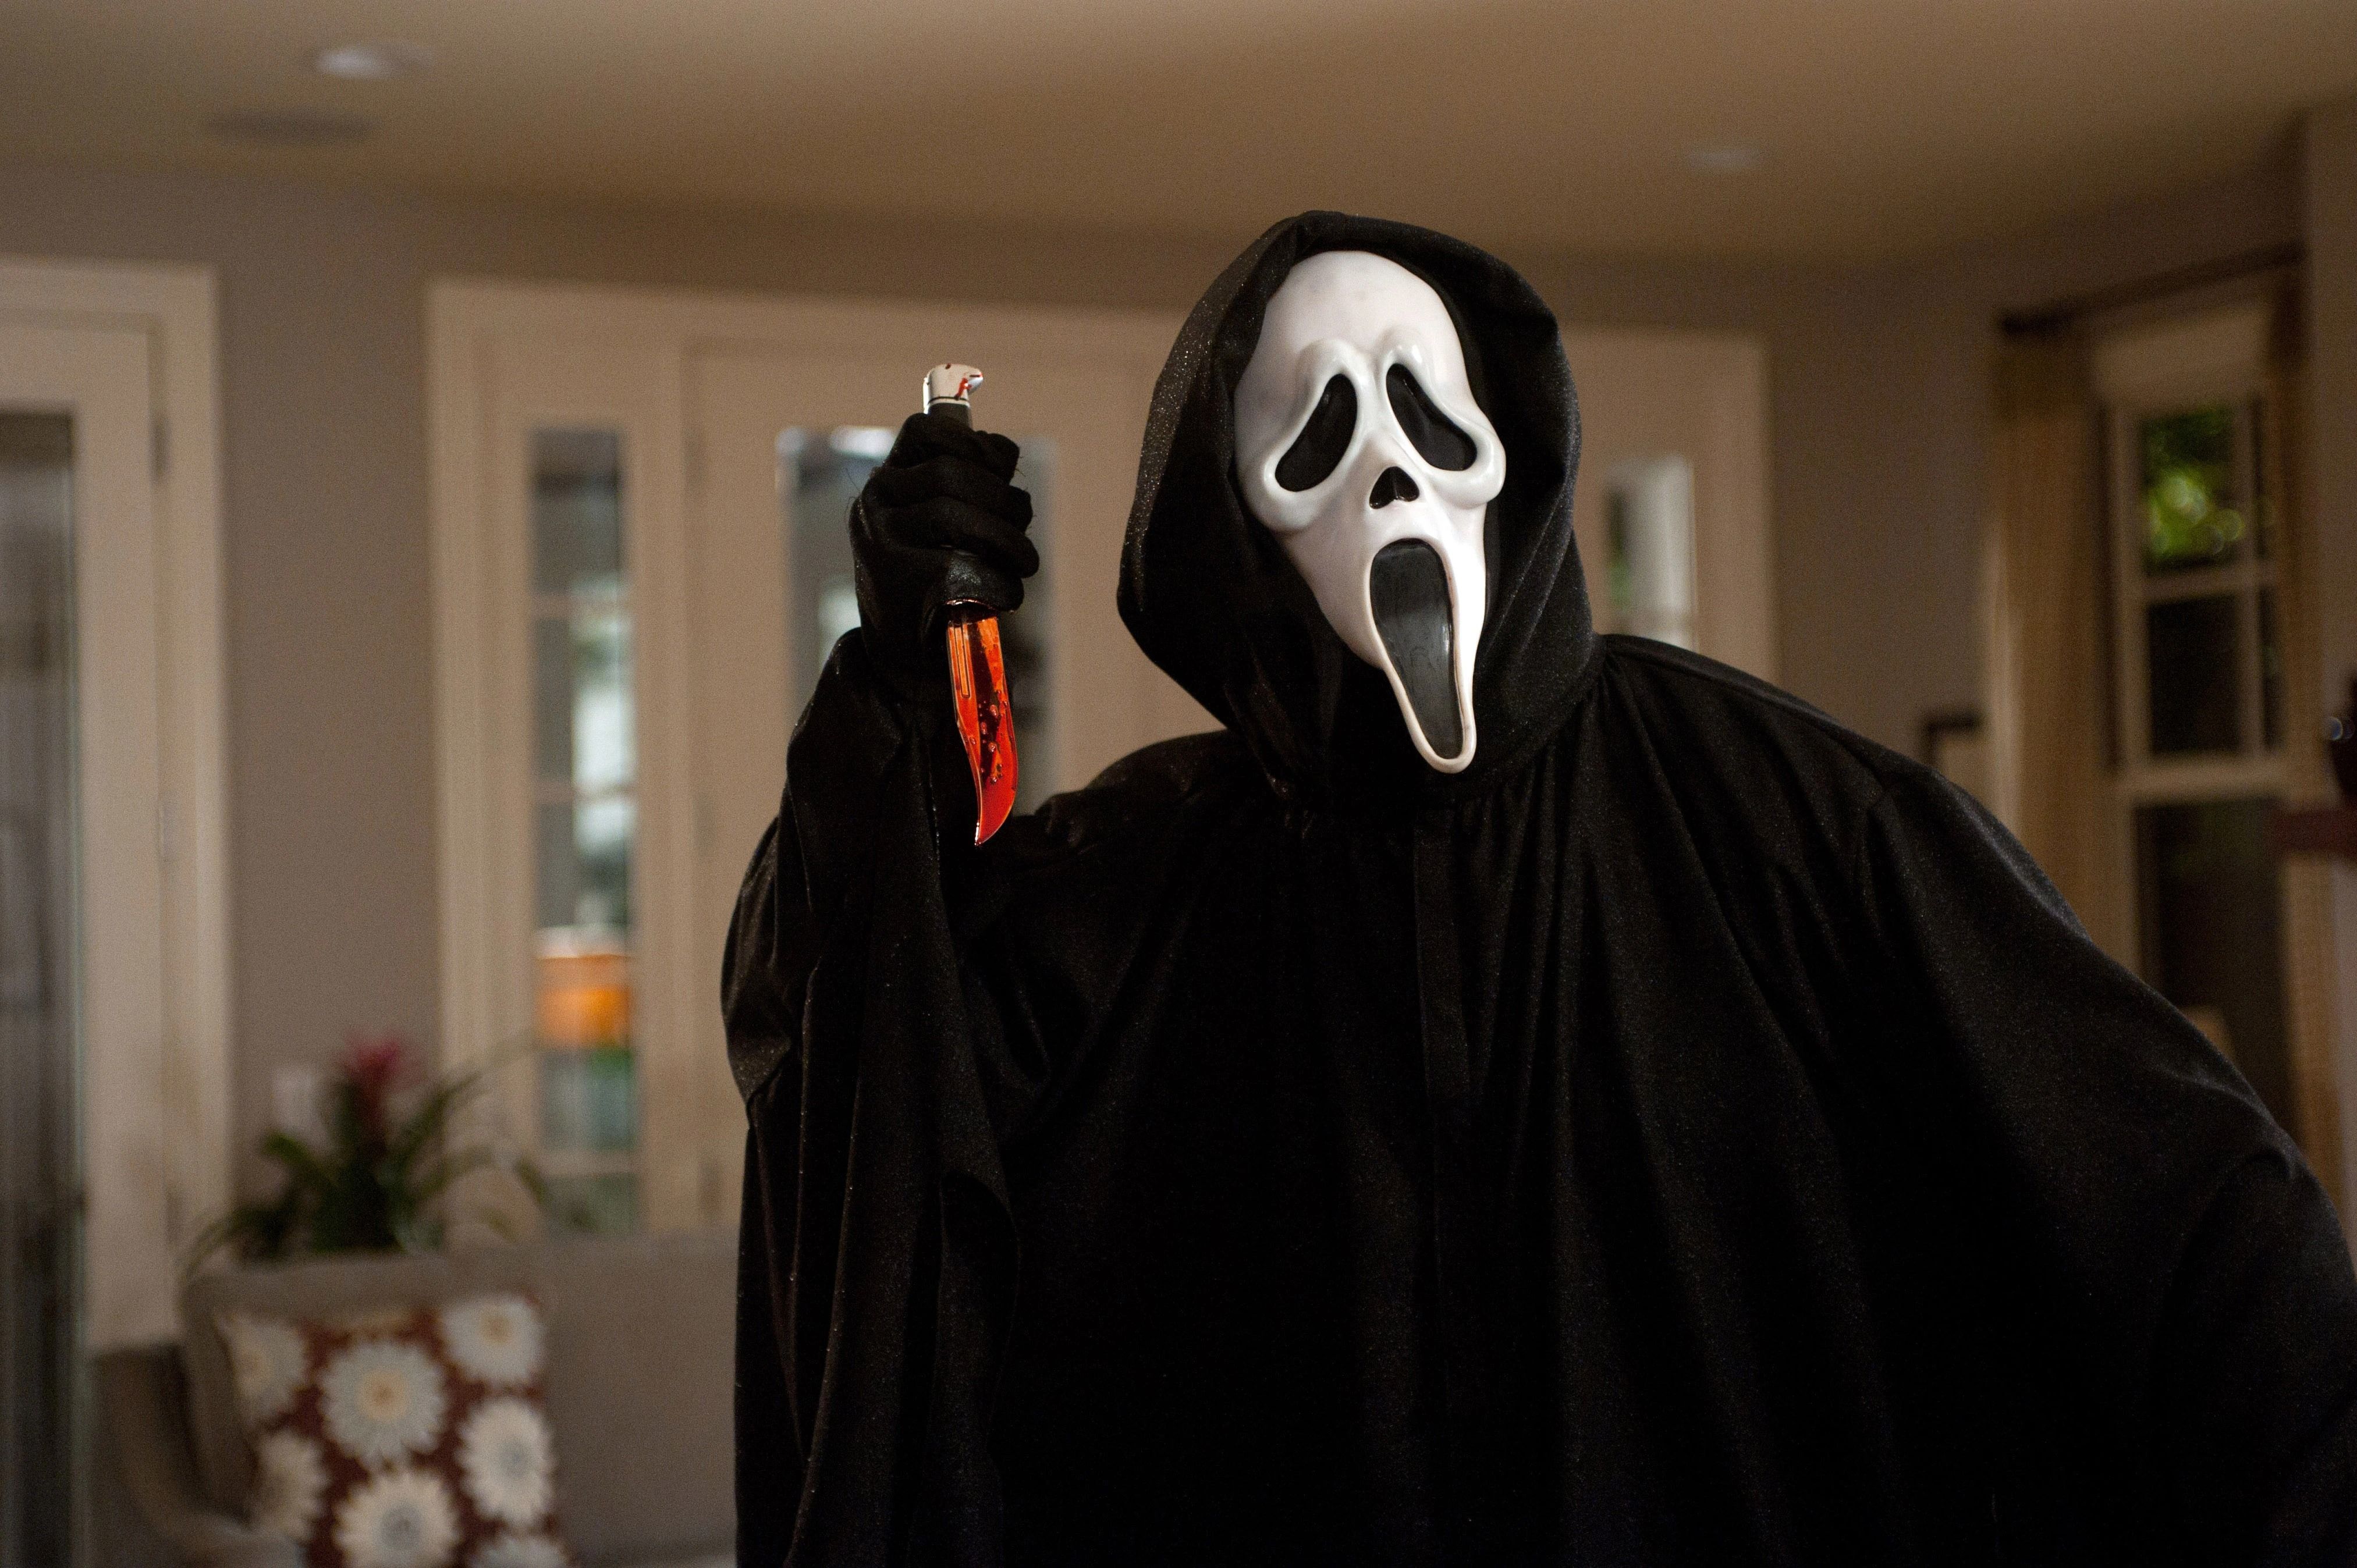 How to Watch 'Scream 6' - Is 'Scream 6' Streaming?